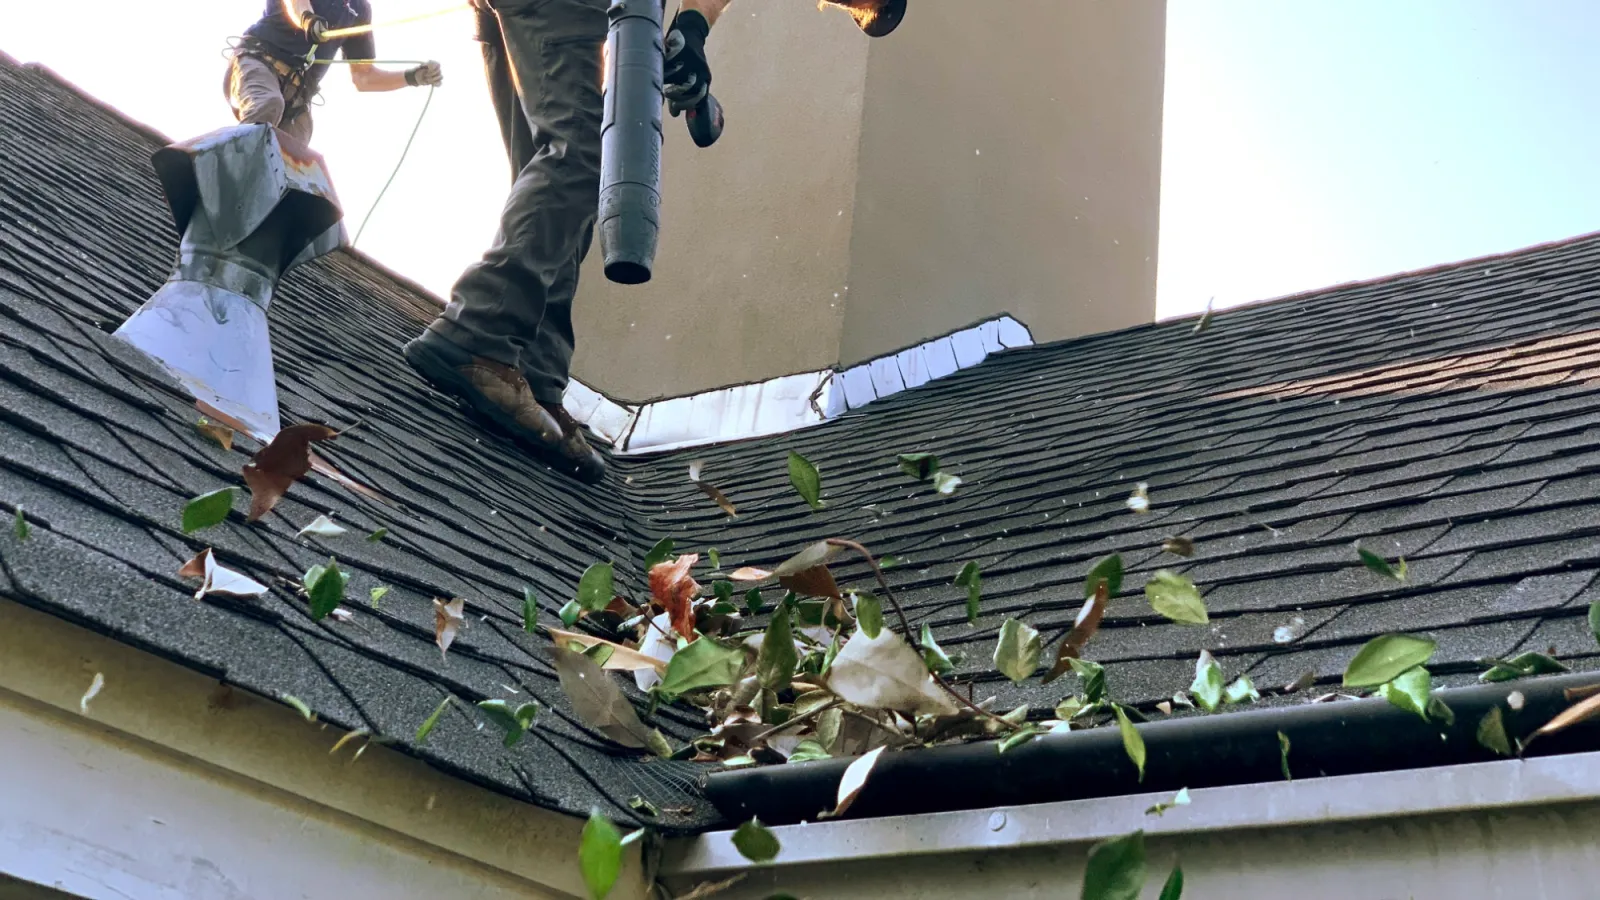 a person blowing leaves on a roof